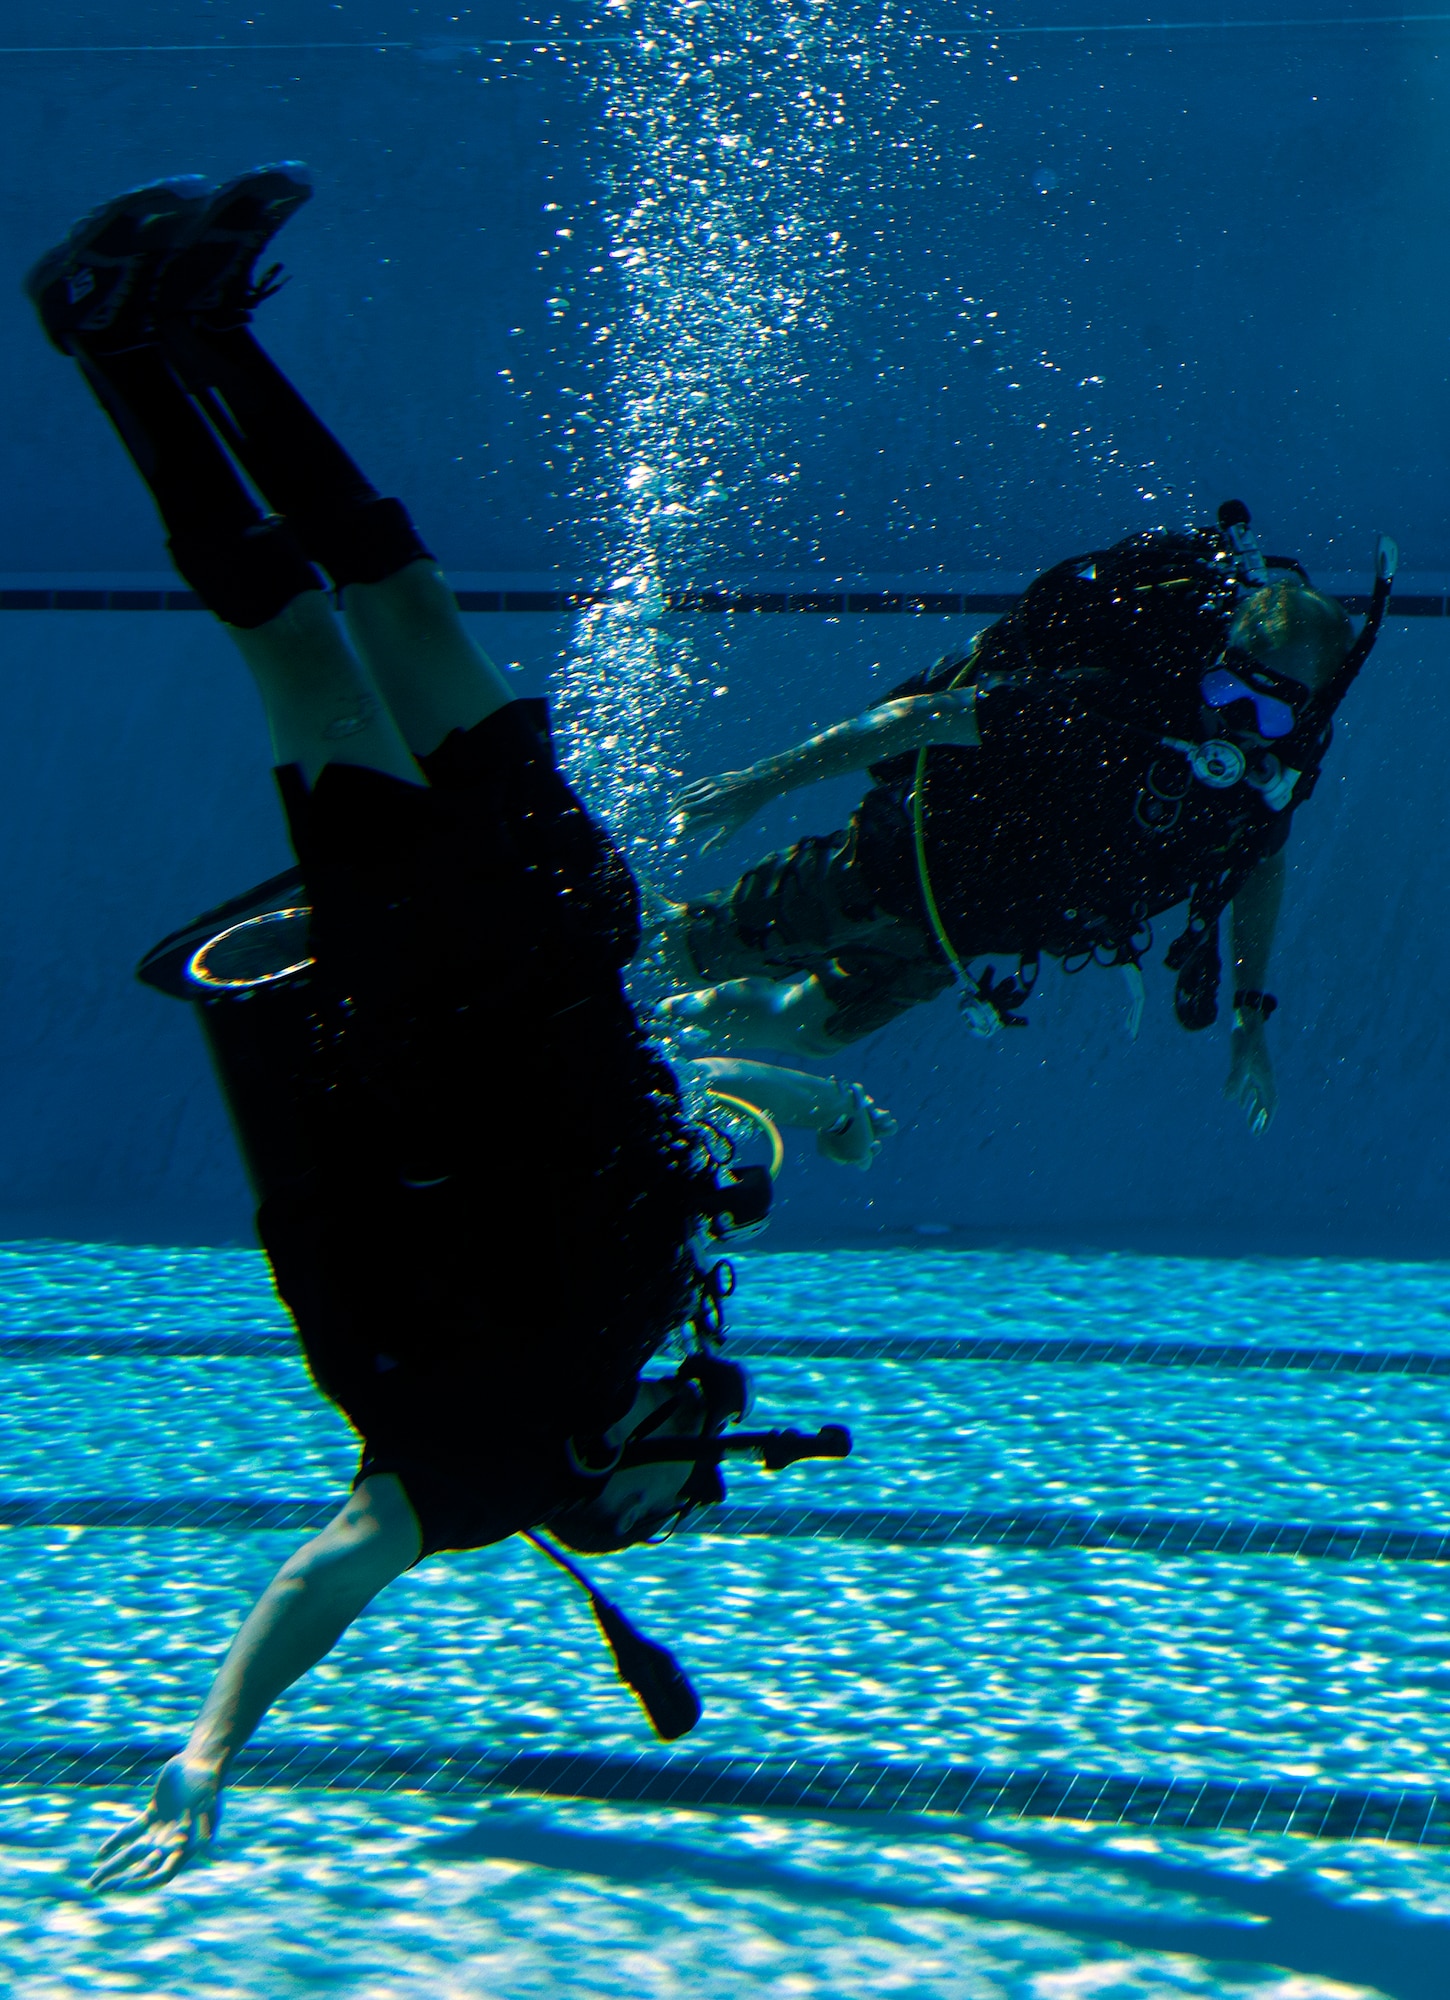 Johnnie Yellock, left, retired Staff Sgt. and 23rd Special Tactics Squadron combat controller, attempts vertical swimming while Michael Gray, right, 24th Special Operations Wing water operations instructor, looks on during SCUBA-Pool Emergency Procedures training on Hurlburt Field, Fla. Oct. 21, 2014. One of challenges Yellock had during the refresher training was maintaining his balance in water without the usual support and propulsion of his legs.(U.S. Air Force photo/Senior Airman Kentavist P. Brackin)

